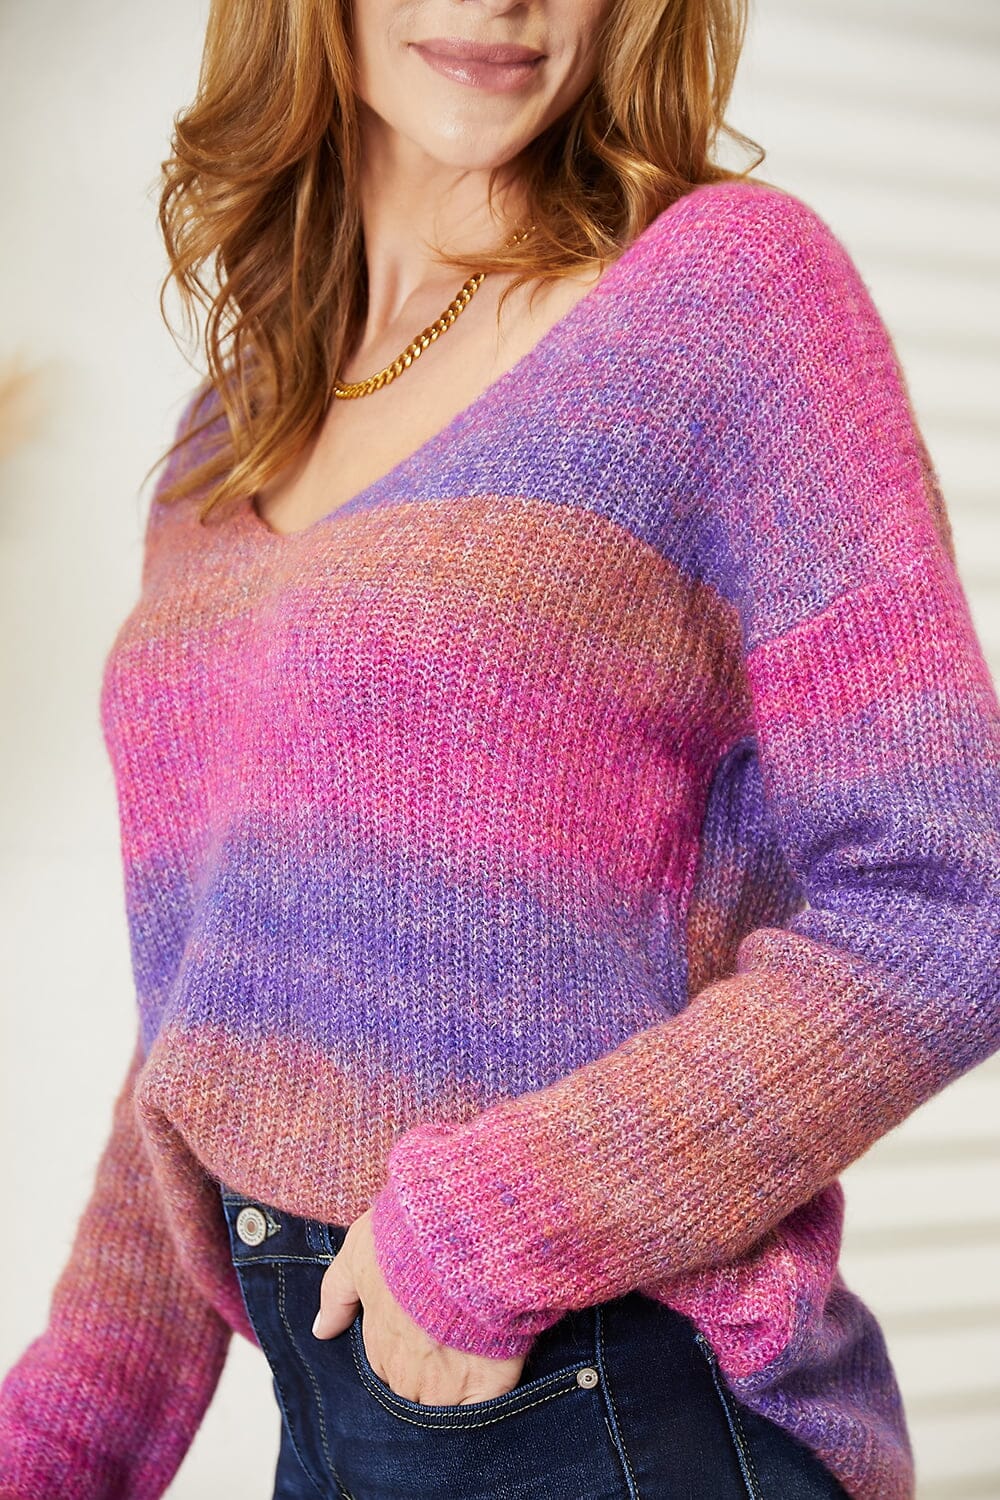 Double Take Purple Pink Multicolored Rib-Knit V-Neck Knit Pullover Top Sweater Shirts & Tops jehouze 